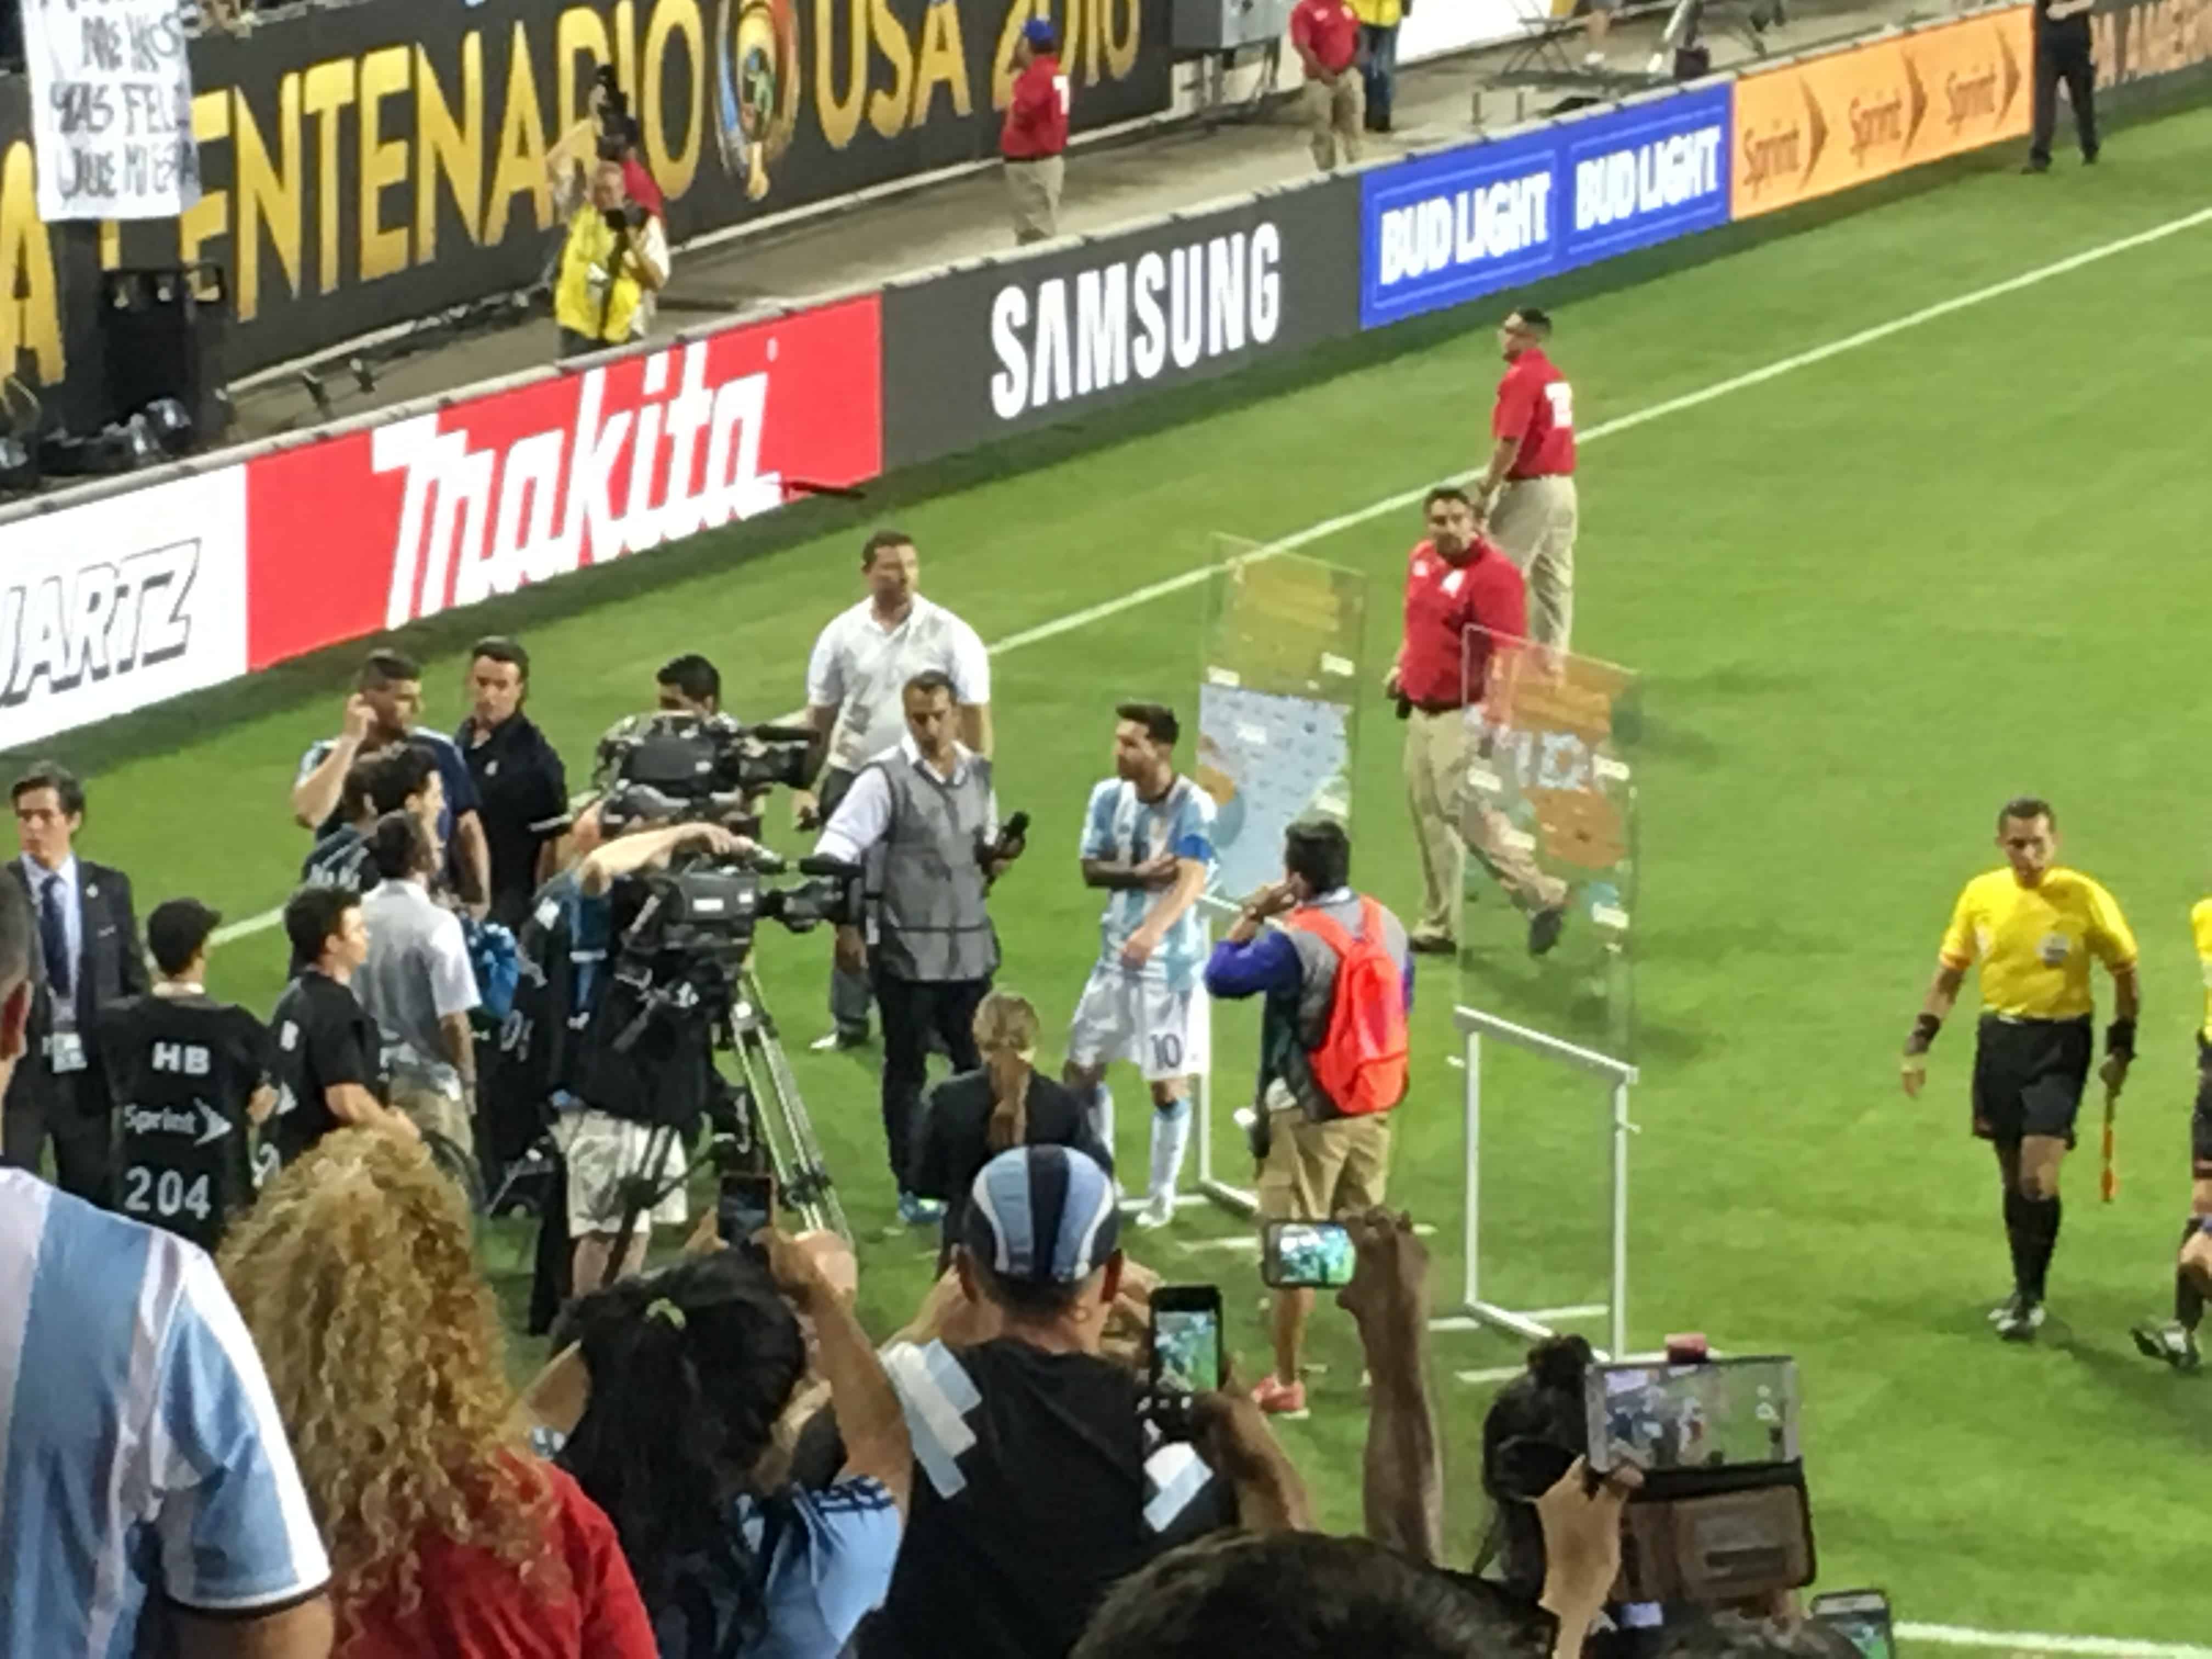 Messi interviewing after the game at Argentina fans at Copa América Centenario USA 2016 at Soldier Field in Chicago, Illinois